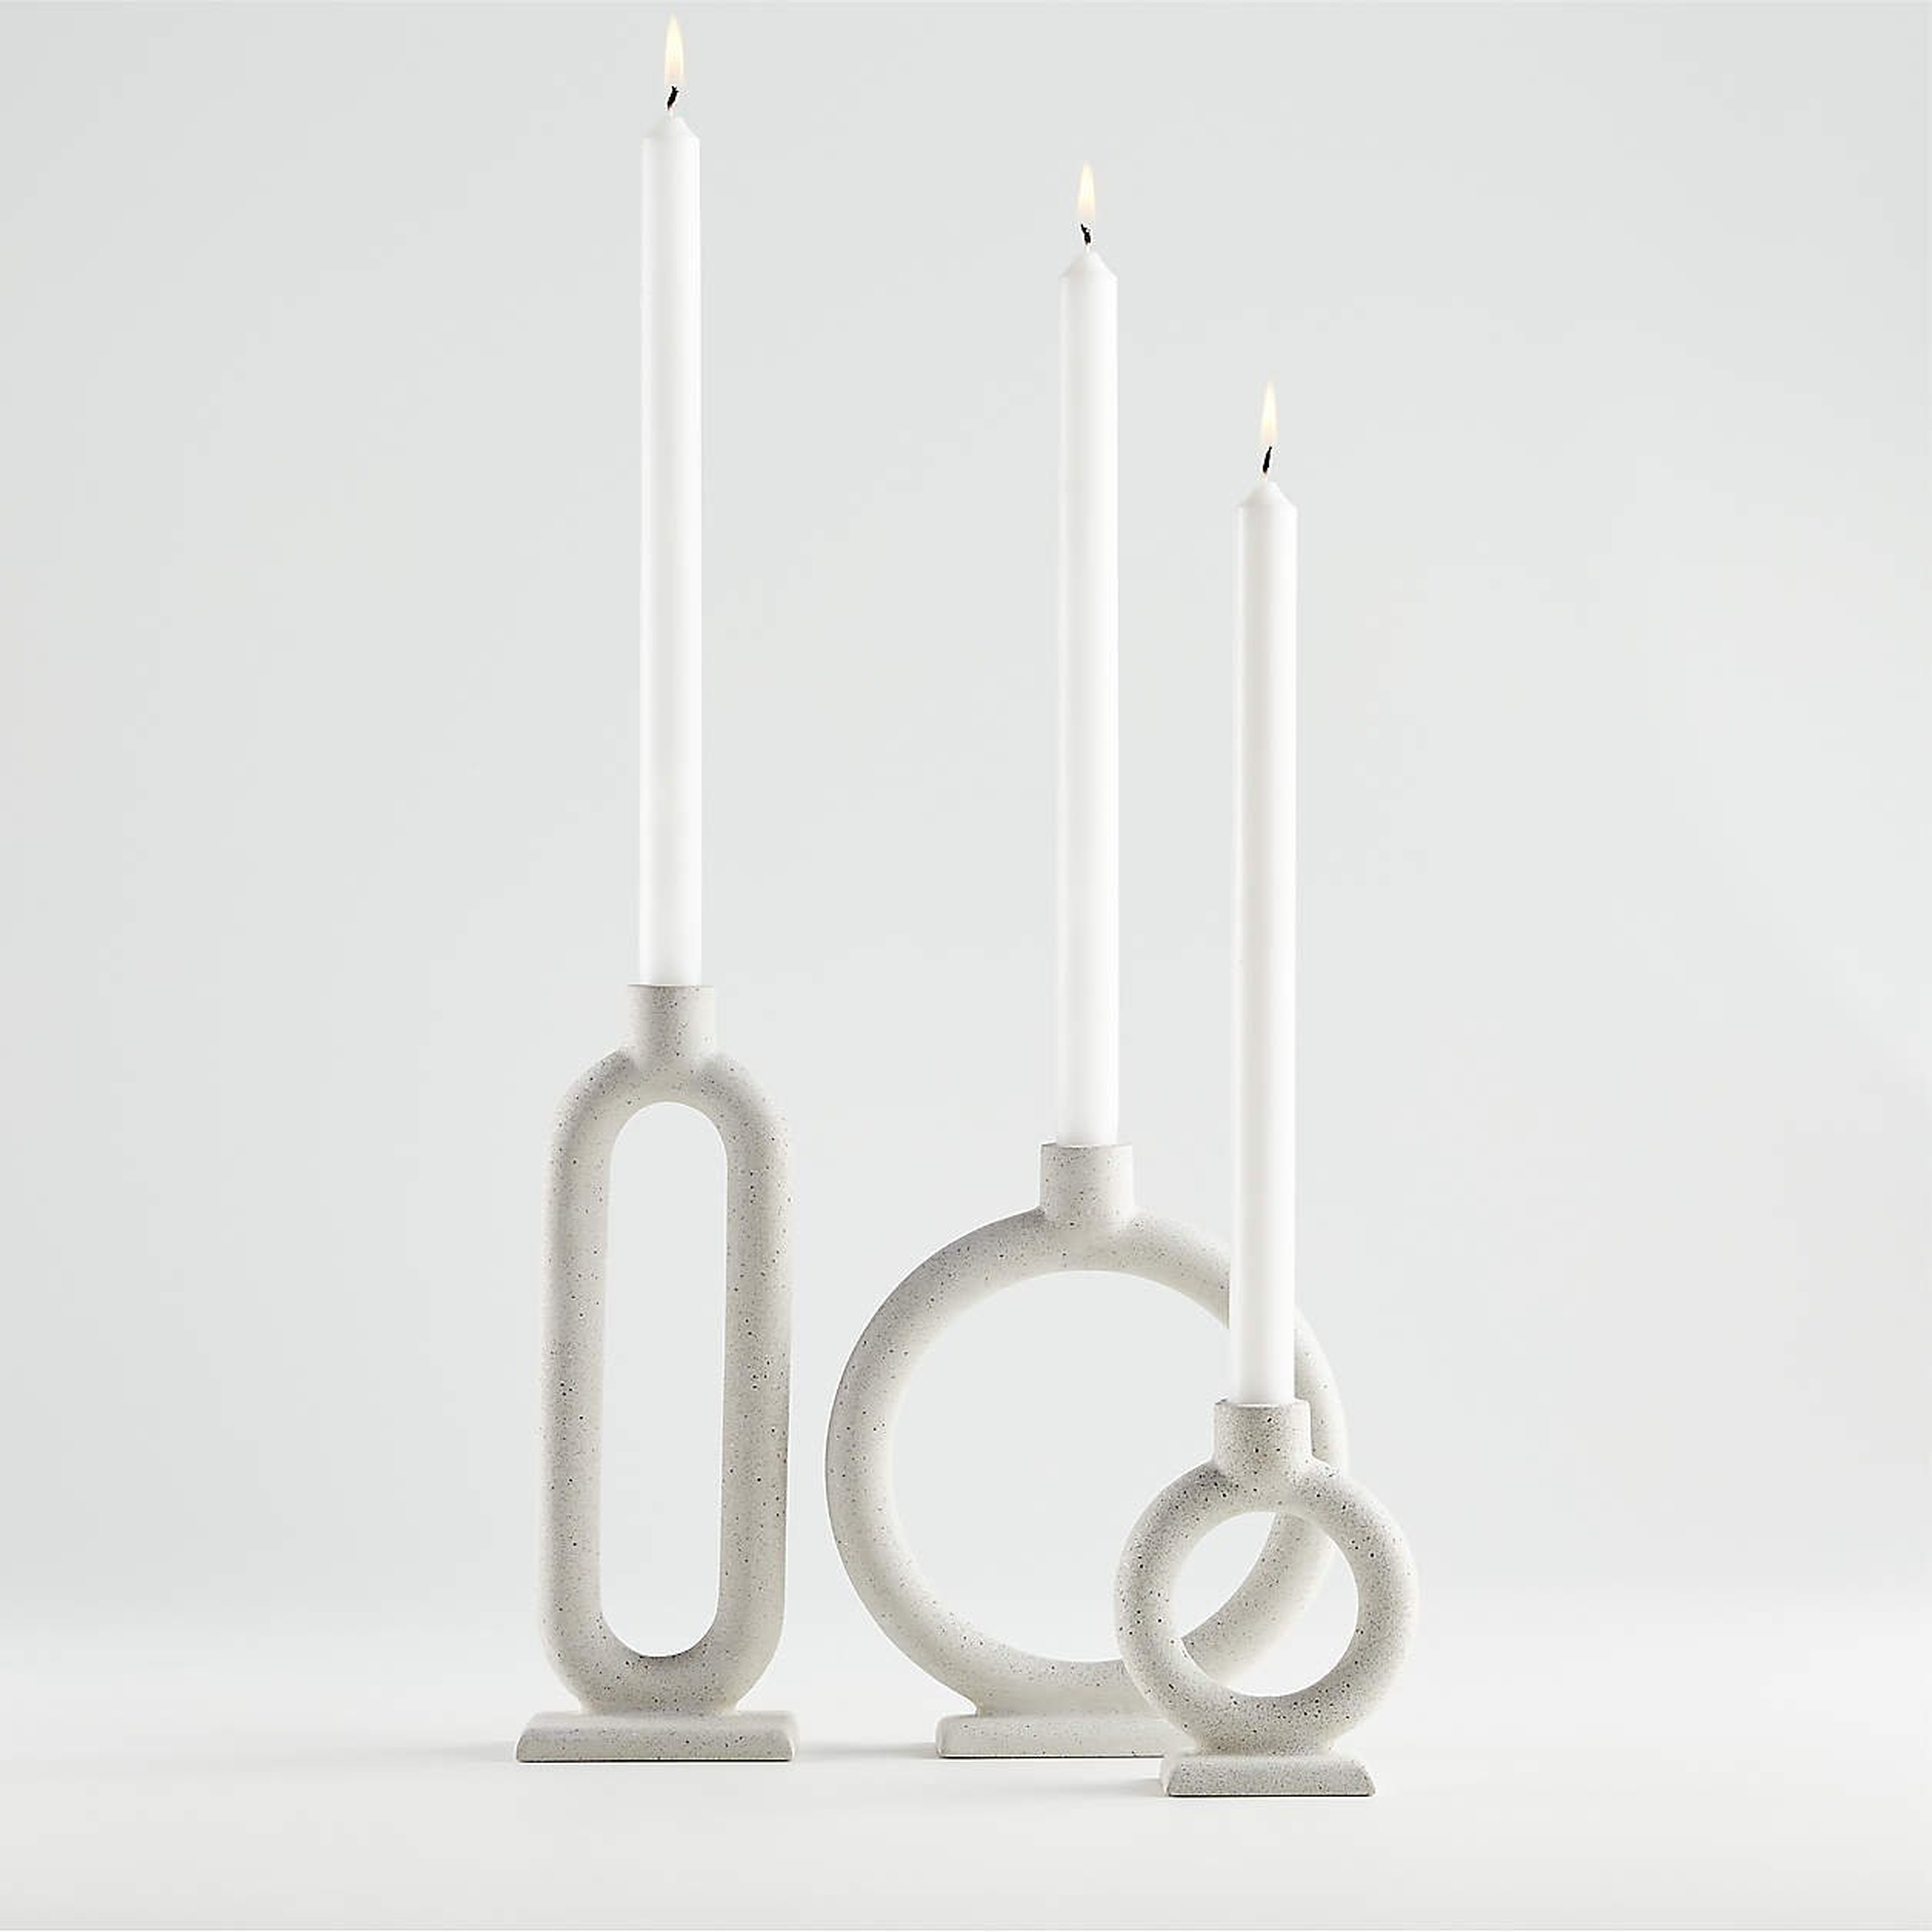 Lorin Cement Taper Candle Holders, Set of 3 - Crate and Barrel